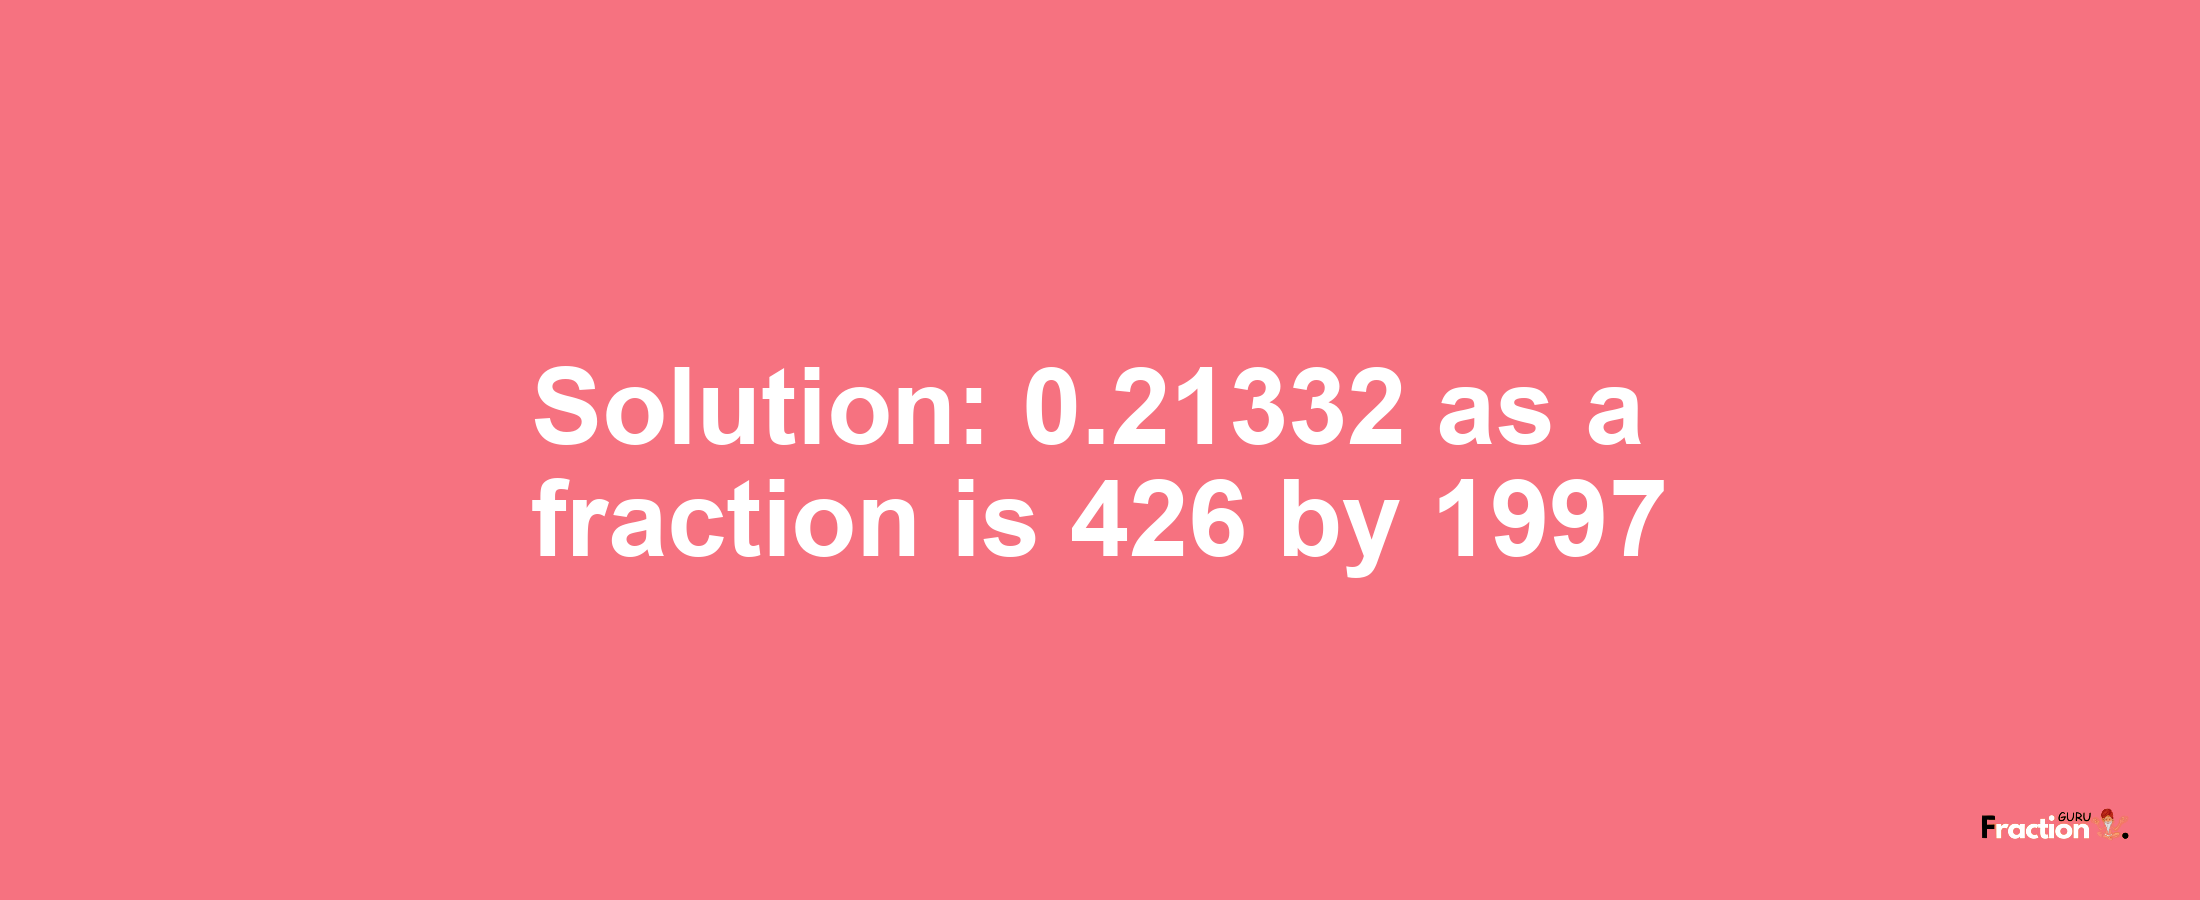 Solution:0.21332 as a fraction is 426/1997